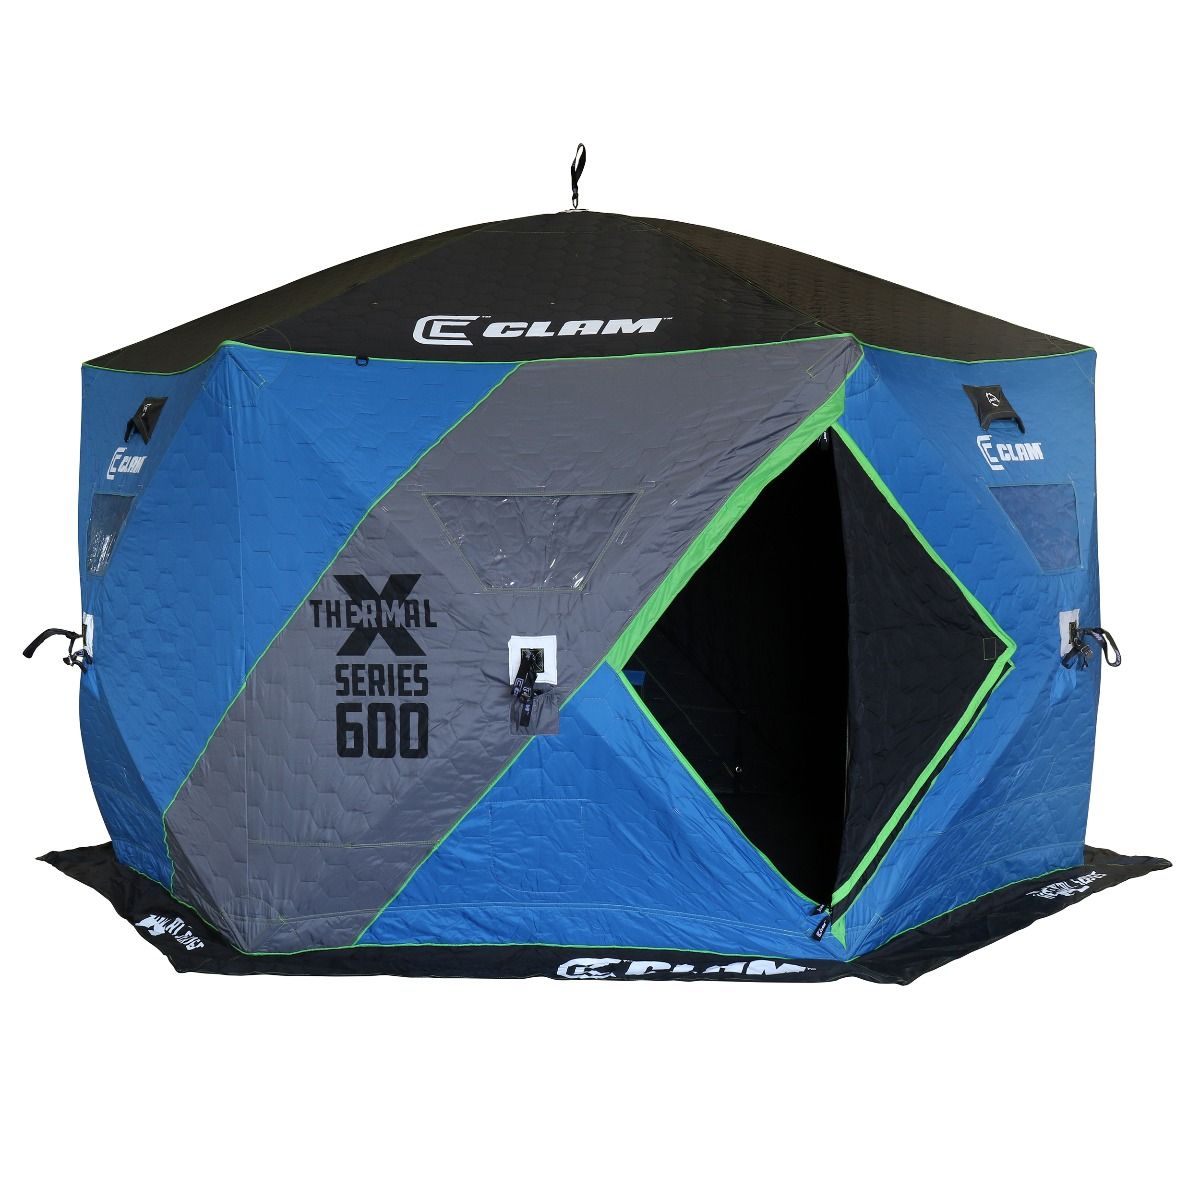 Clam X Series Thermal Hub Shelter